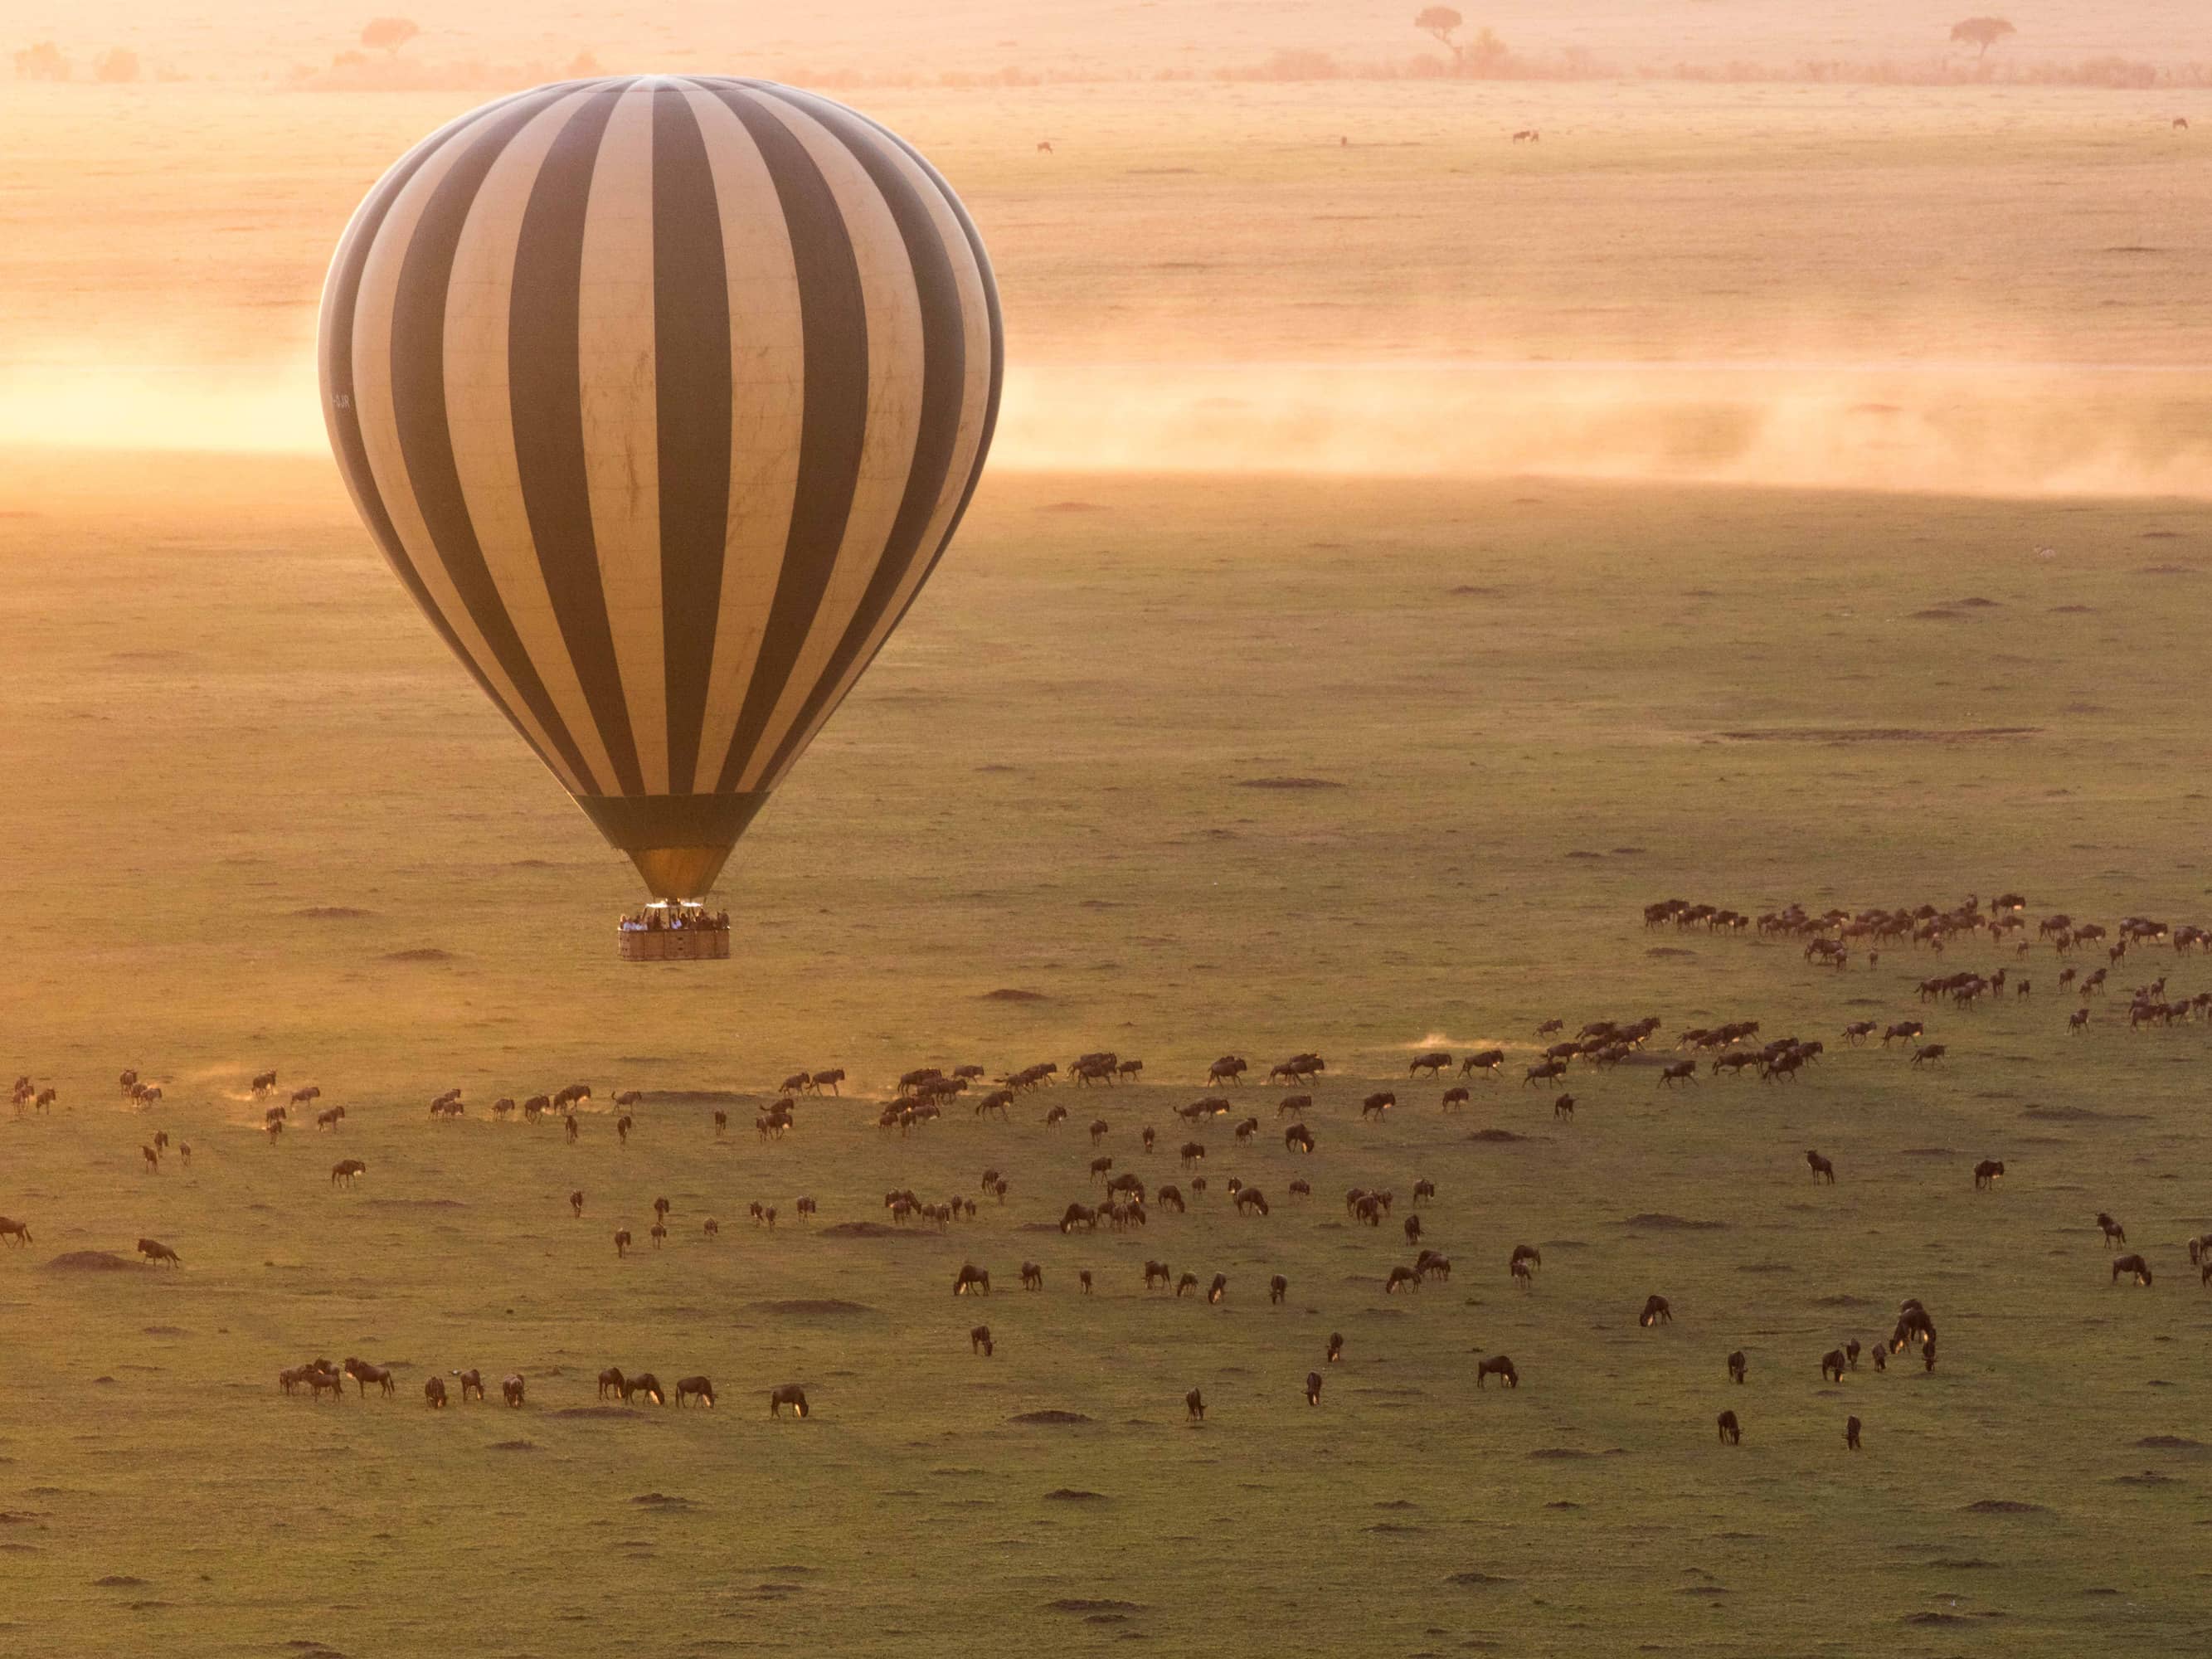  Soar over the Serengeti in a hot-air balloon  